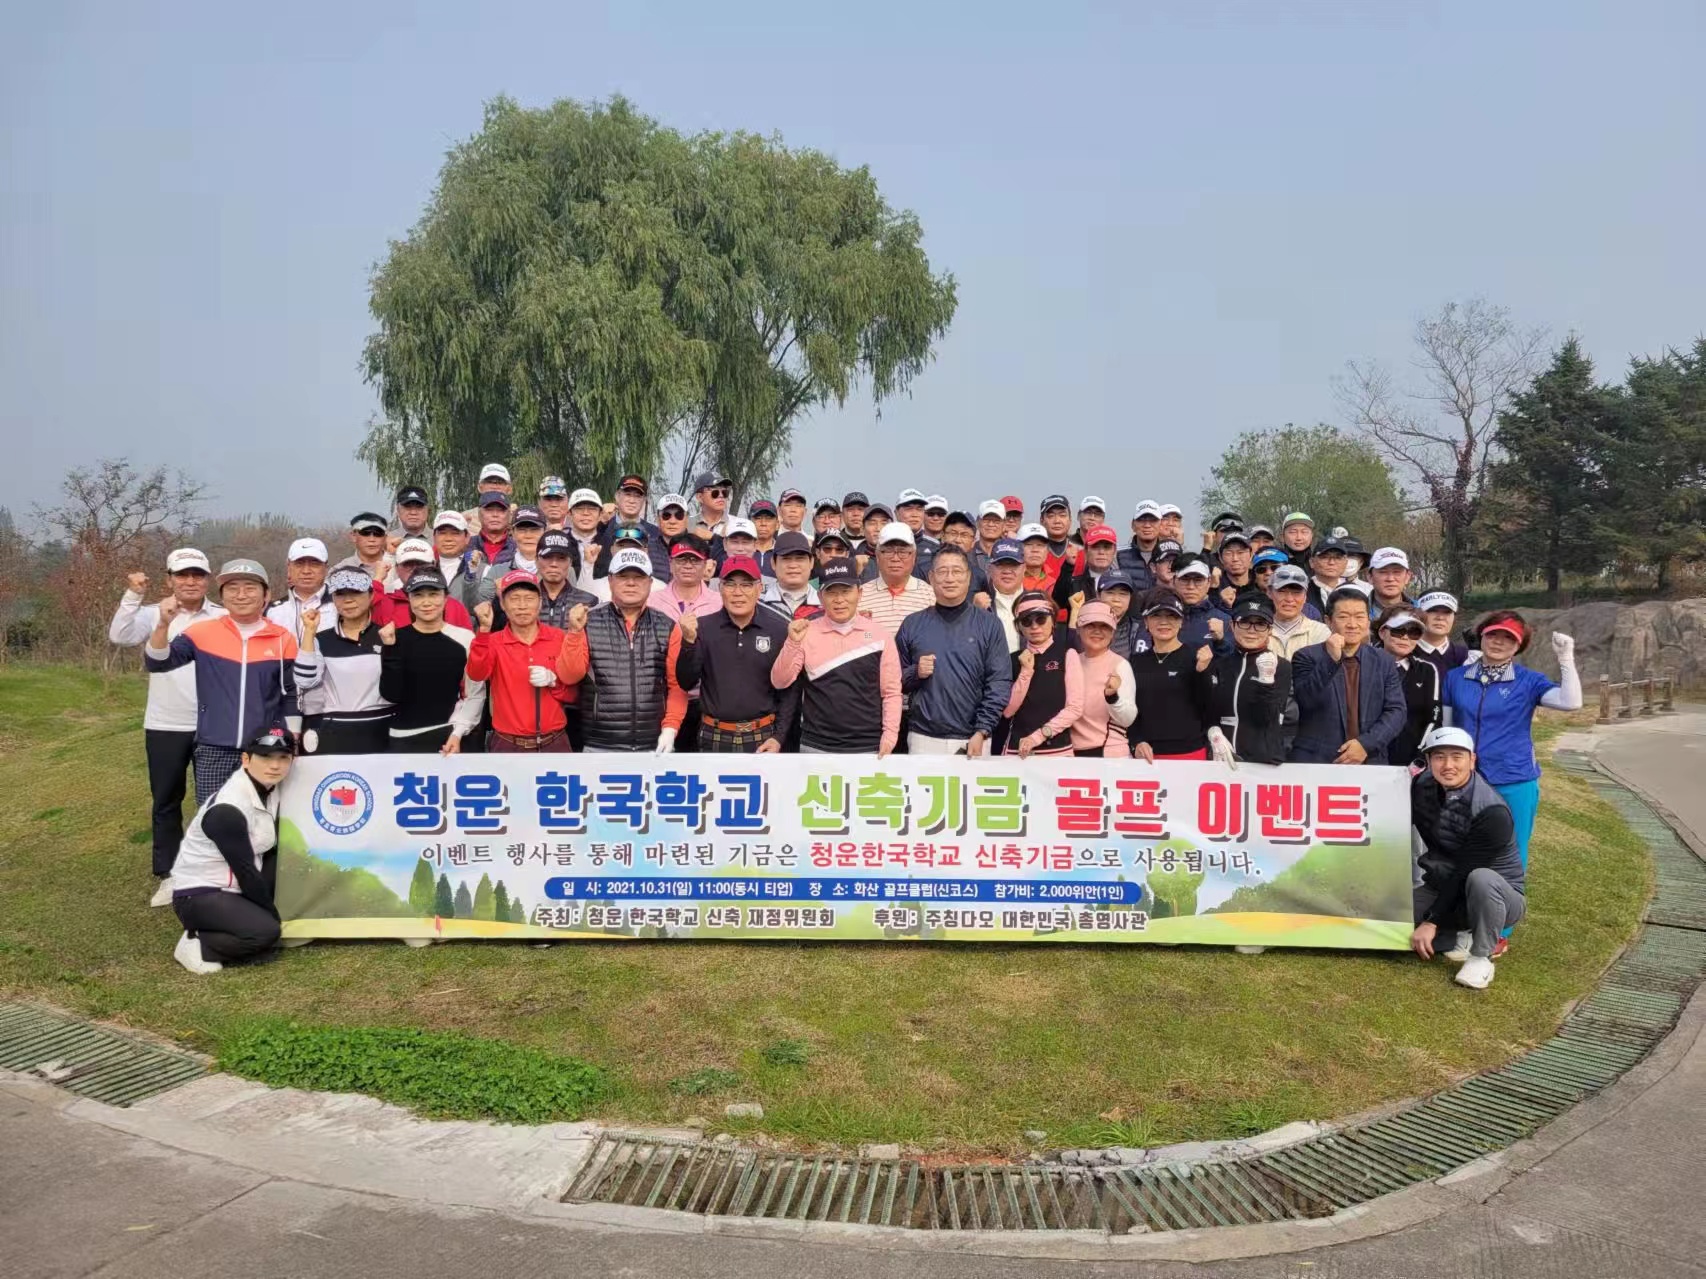 Fund-raising golf contest for Chungwoon Korean School’s new building (provided by Chungwoon Korean School)